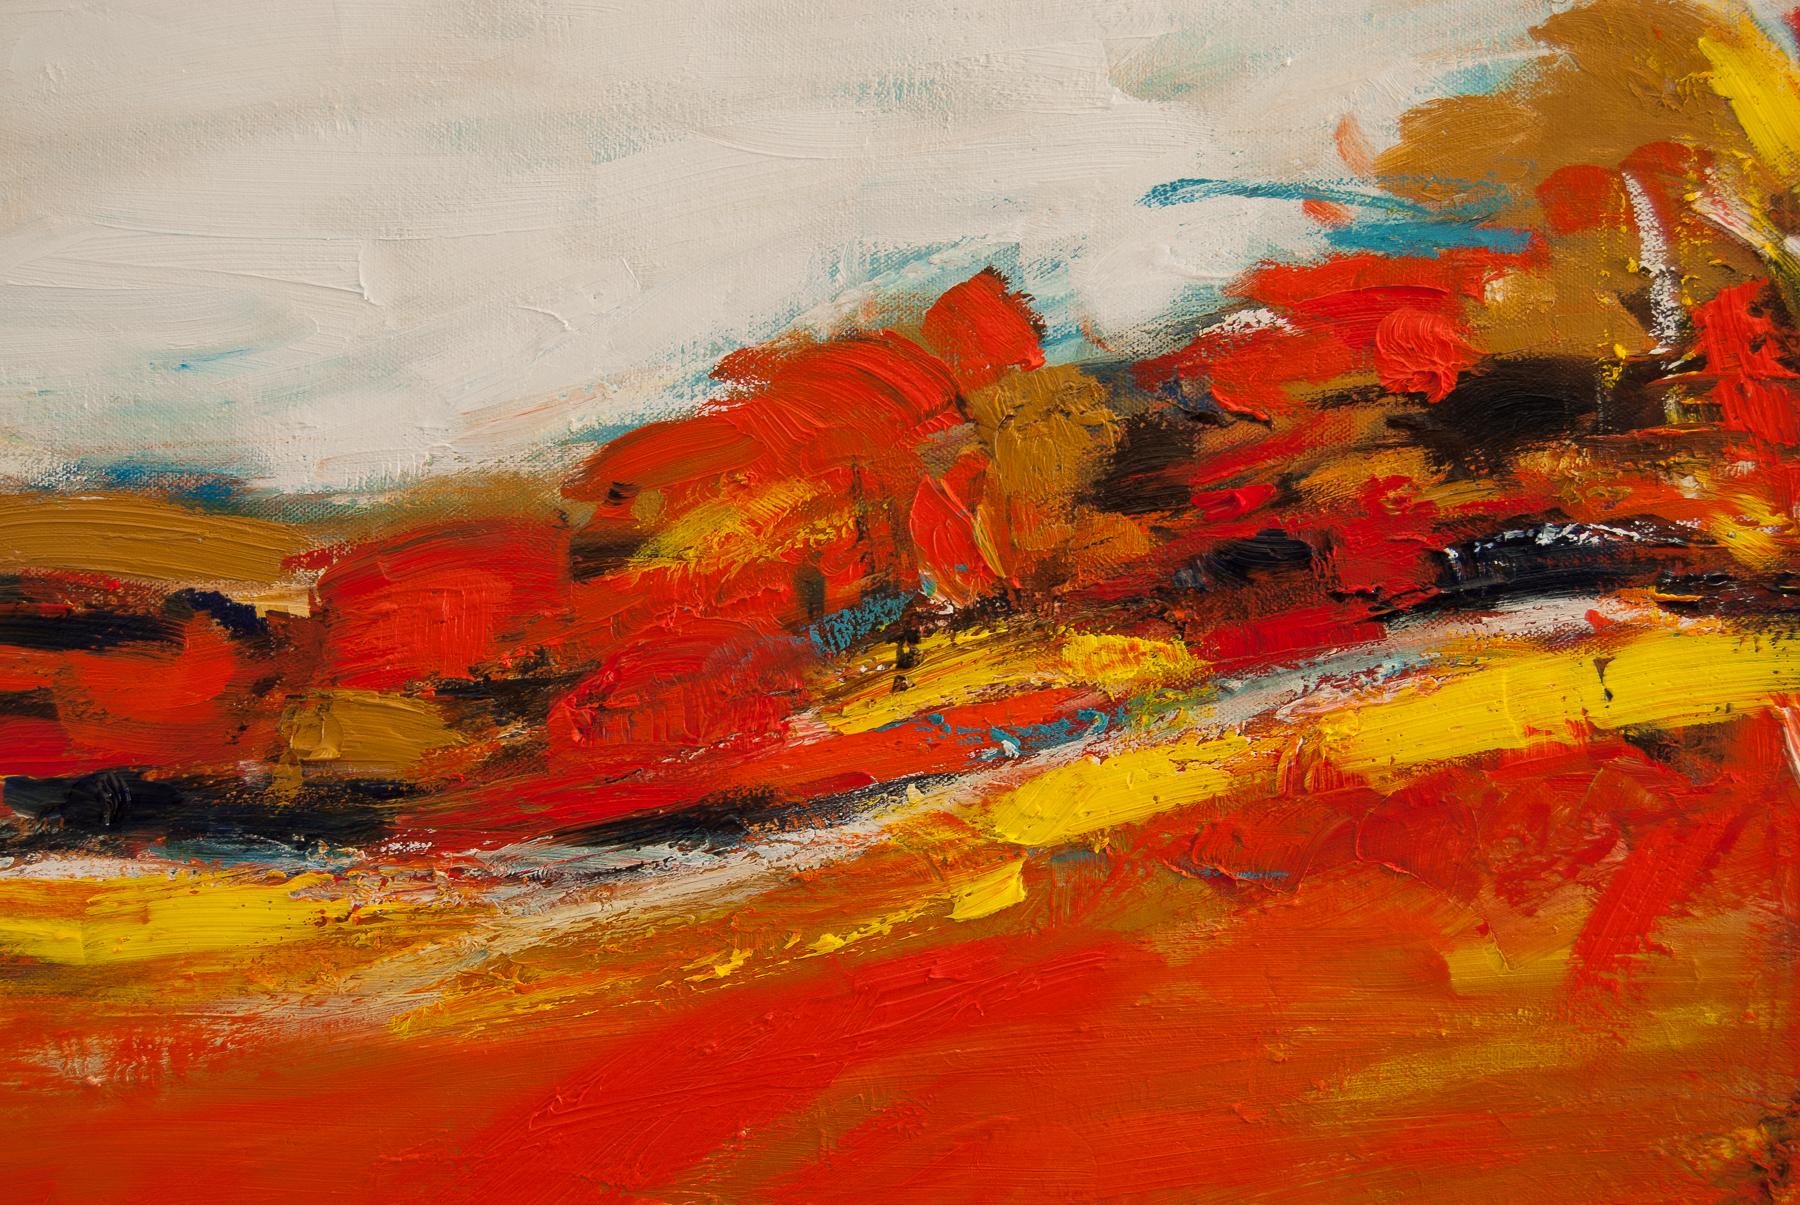 <p>Artist Comments<br>Artist Kajal Zaveri presents a vibrant abstract landscape with varying hues of fiery of orange. Inspired by the changing colors of the fall season, Kajal replicates them on the canvas. She expresses the autumnal sunset in